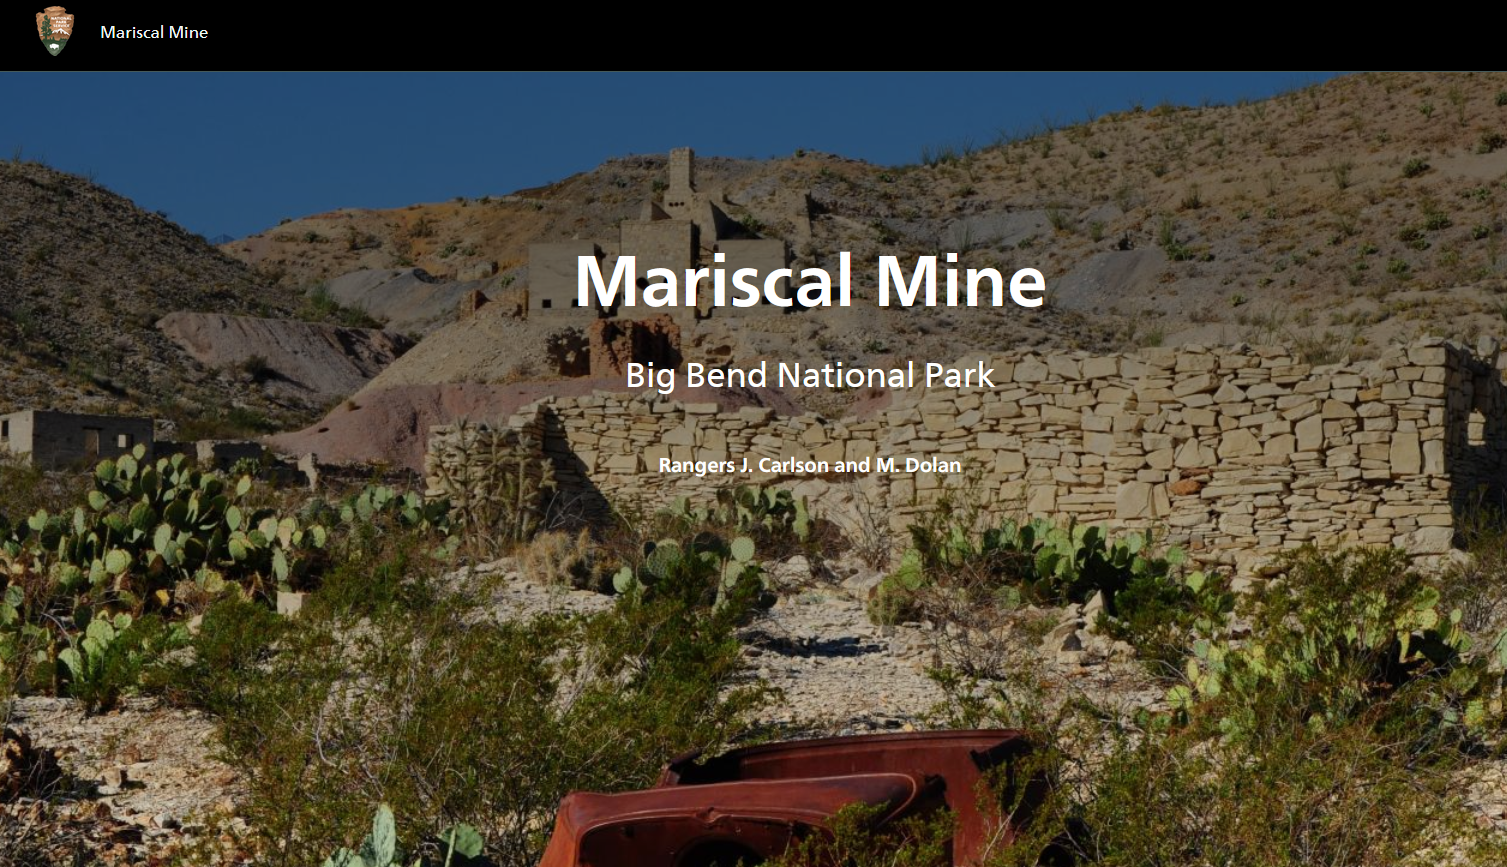 At the top of the image there is a black banner that says "Mariscal Mine" with the National Park Service arrowhead beside it. Below is the title, "Mariscal Mine Big Bend National Park" with an image of the mine in the background.